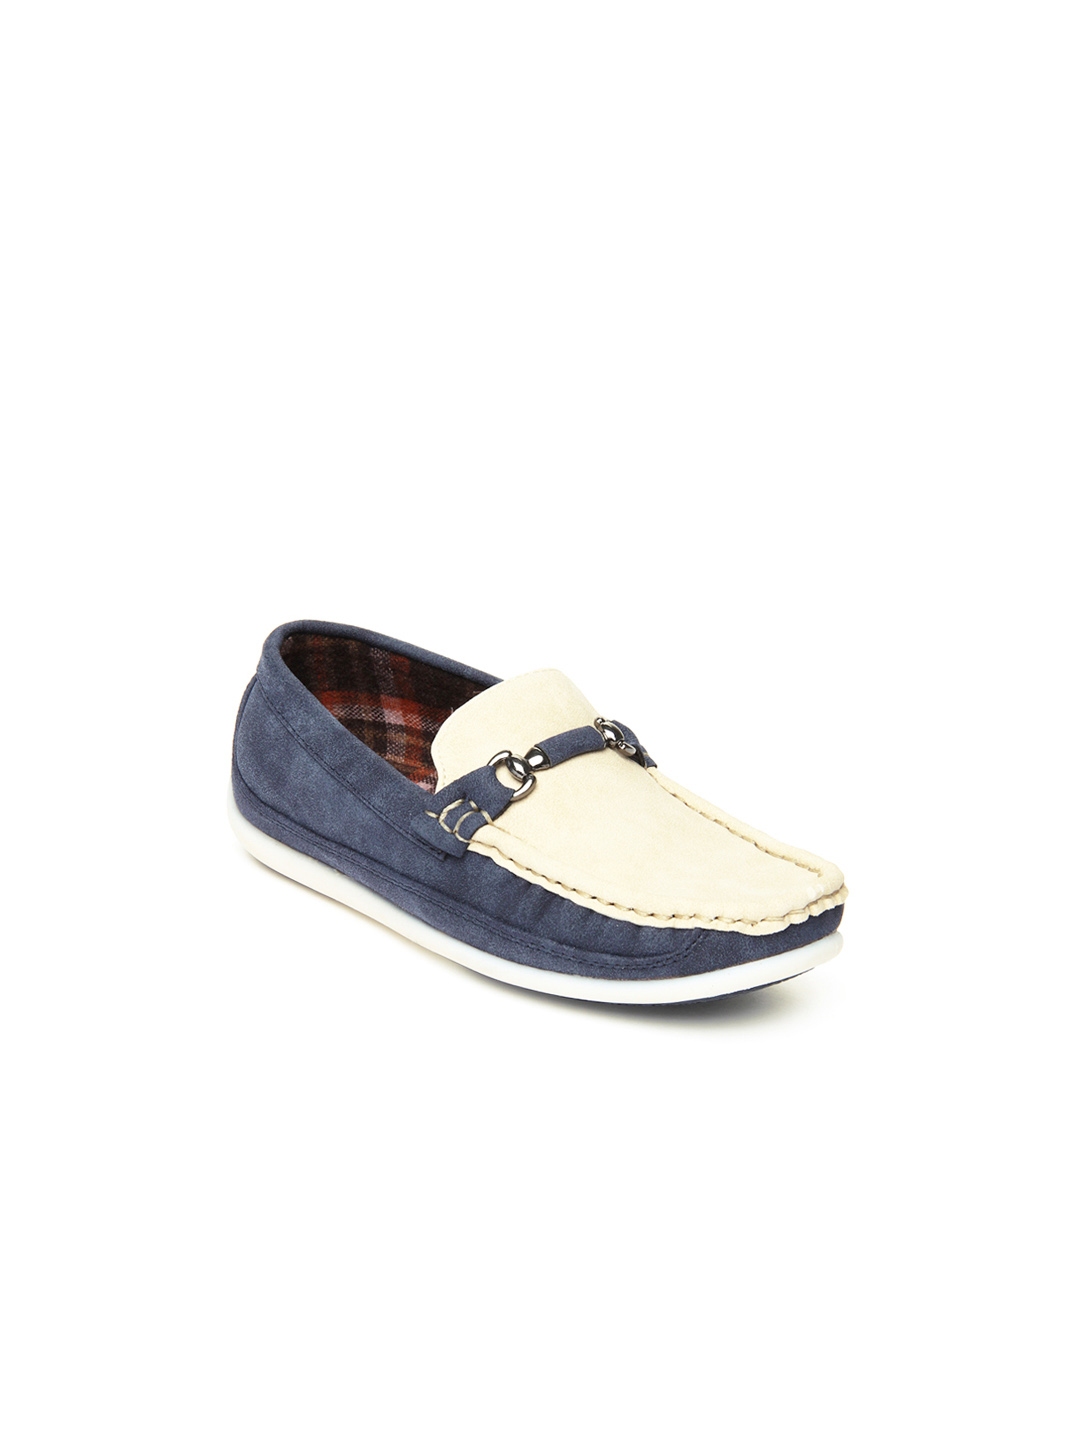 Buy Kittens Boys Navy Loafers - Casual Shoes for Boys 421547 | Myntra